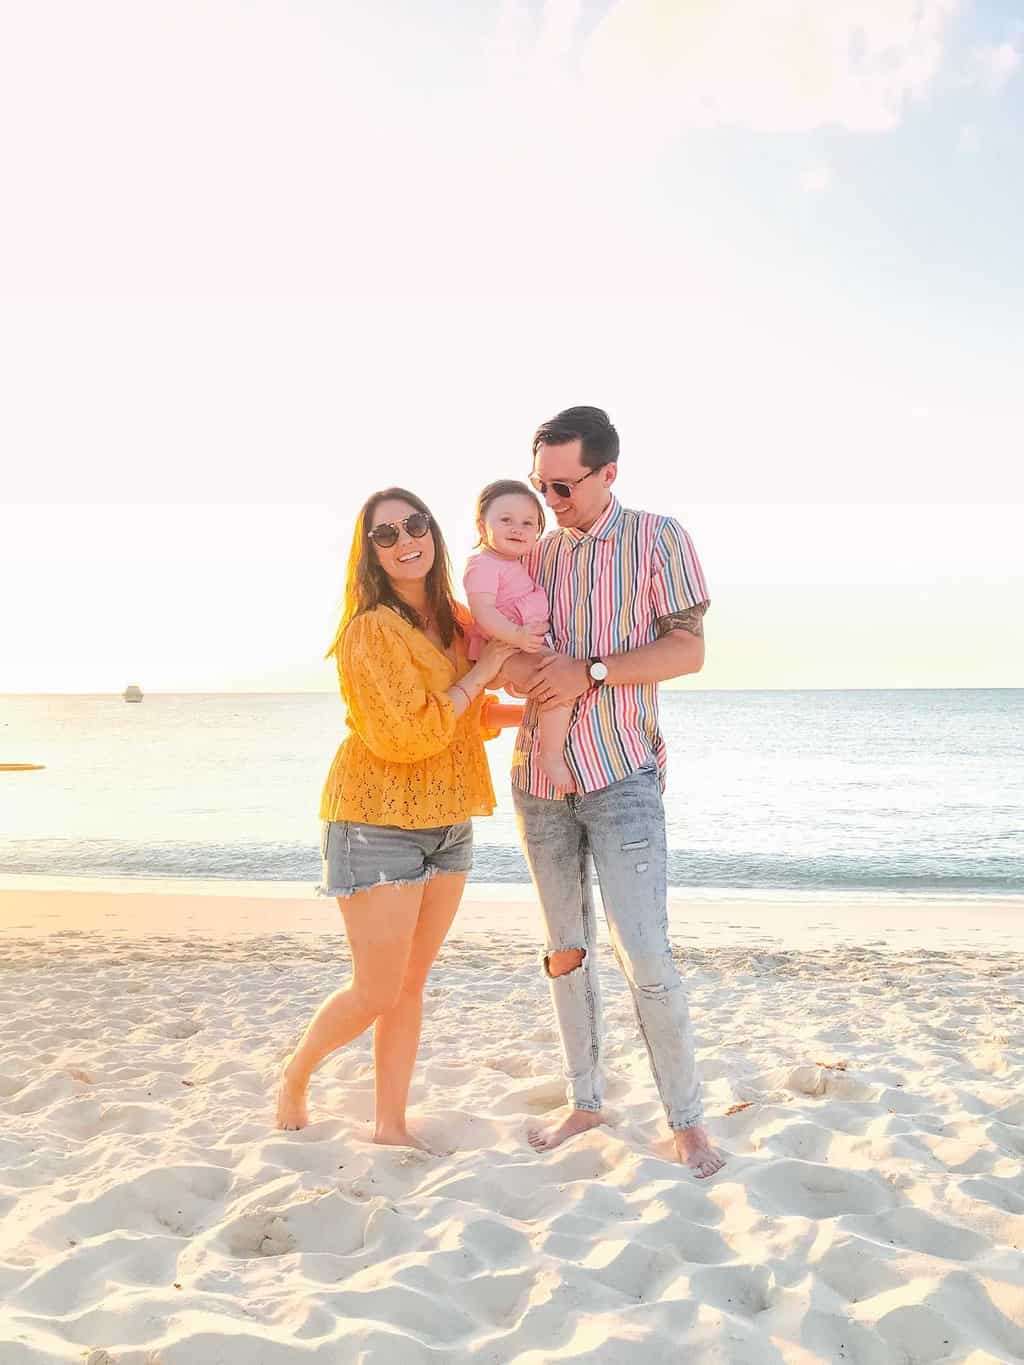 Our Trip To Beaches Turks & Caicos — A Family Friendly All-inclusive Resort, the perfect vacation for big groups and families with kids! by top Houston lifestyle blogger Ashley Rose of Sugar & Cloth